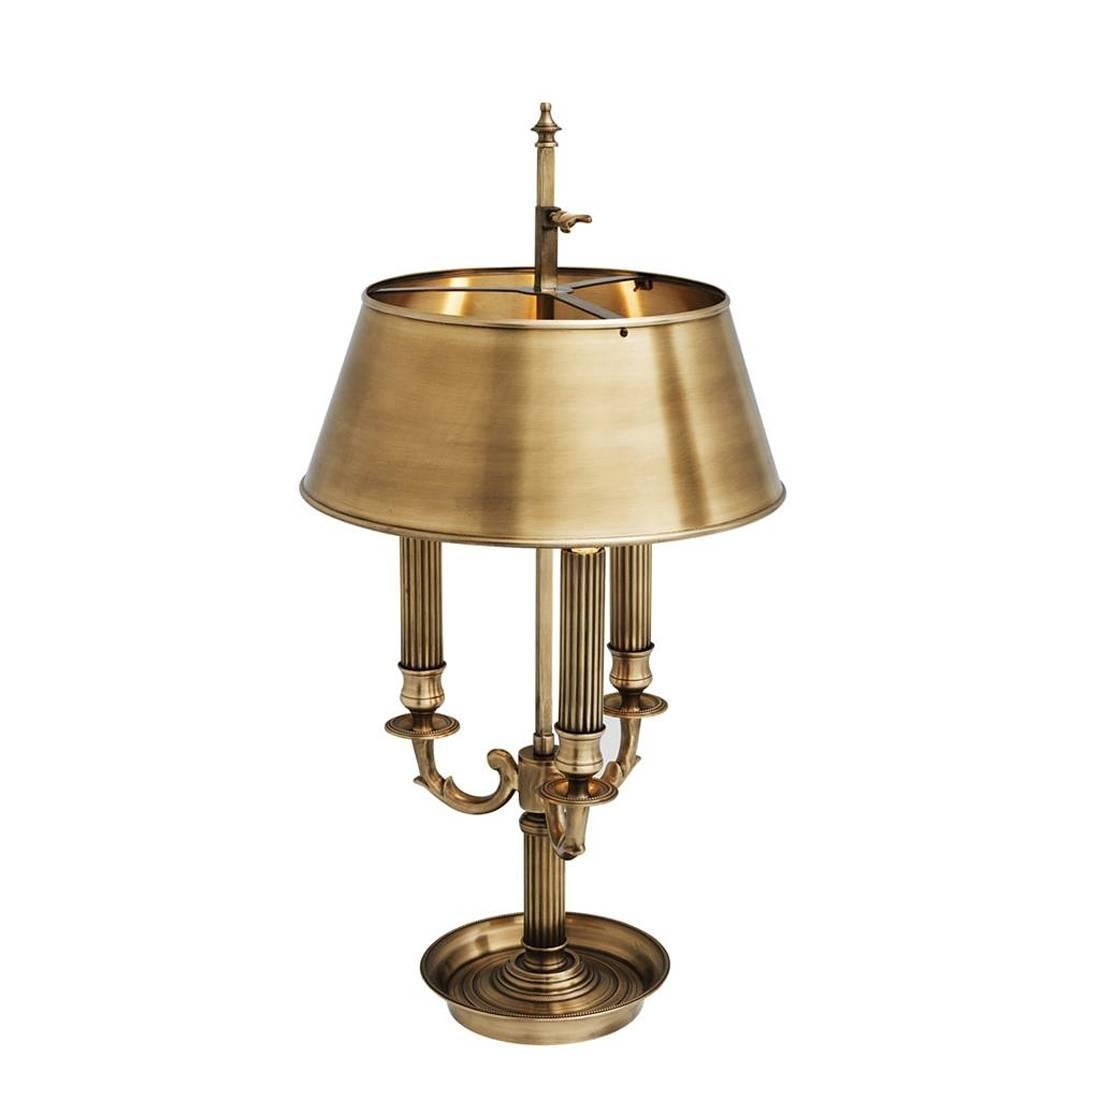 Hand-Crafted Martins Table Lamp in Antique Brass Finish